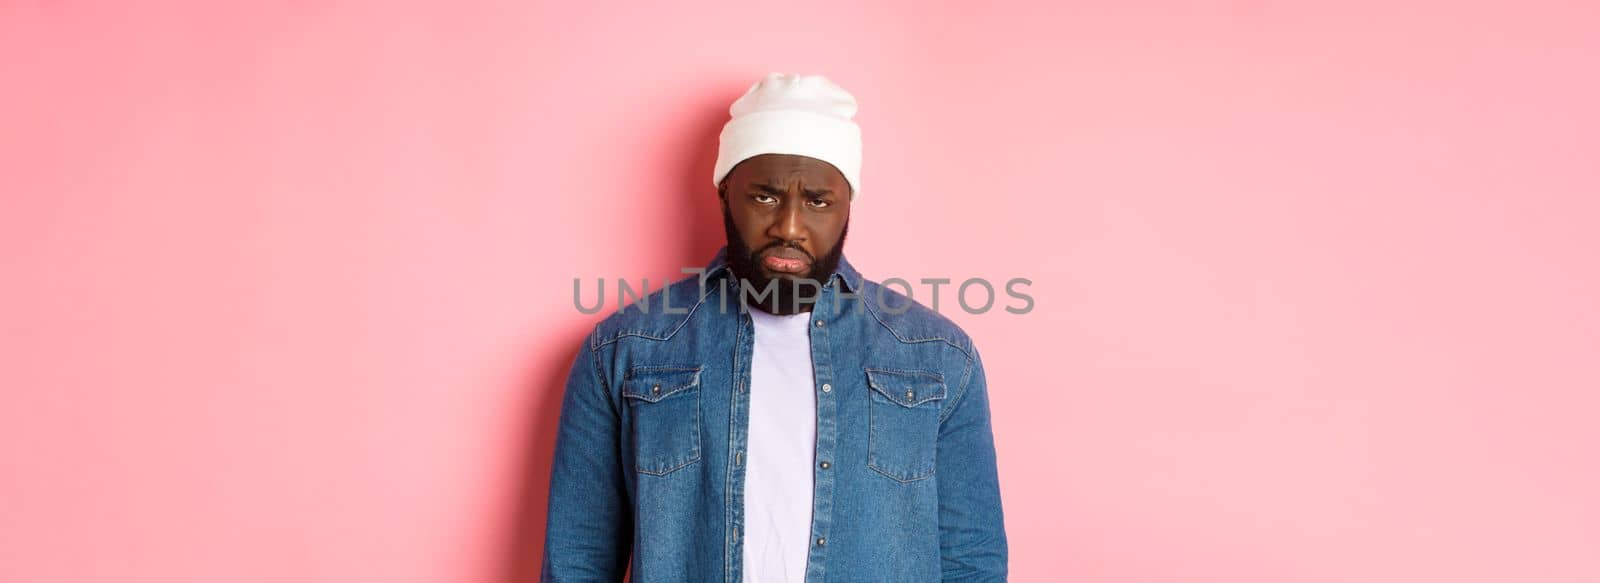 Disappointed and sad Black man, sulking and whining, looking at camera with offended grimace, standing over pink background.